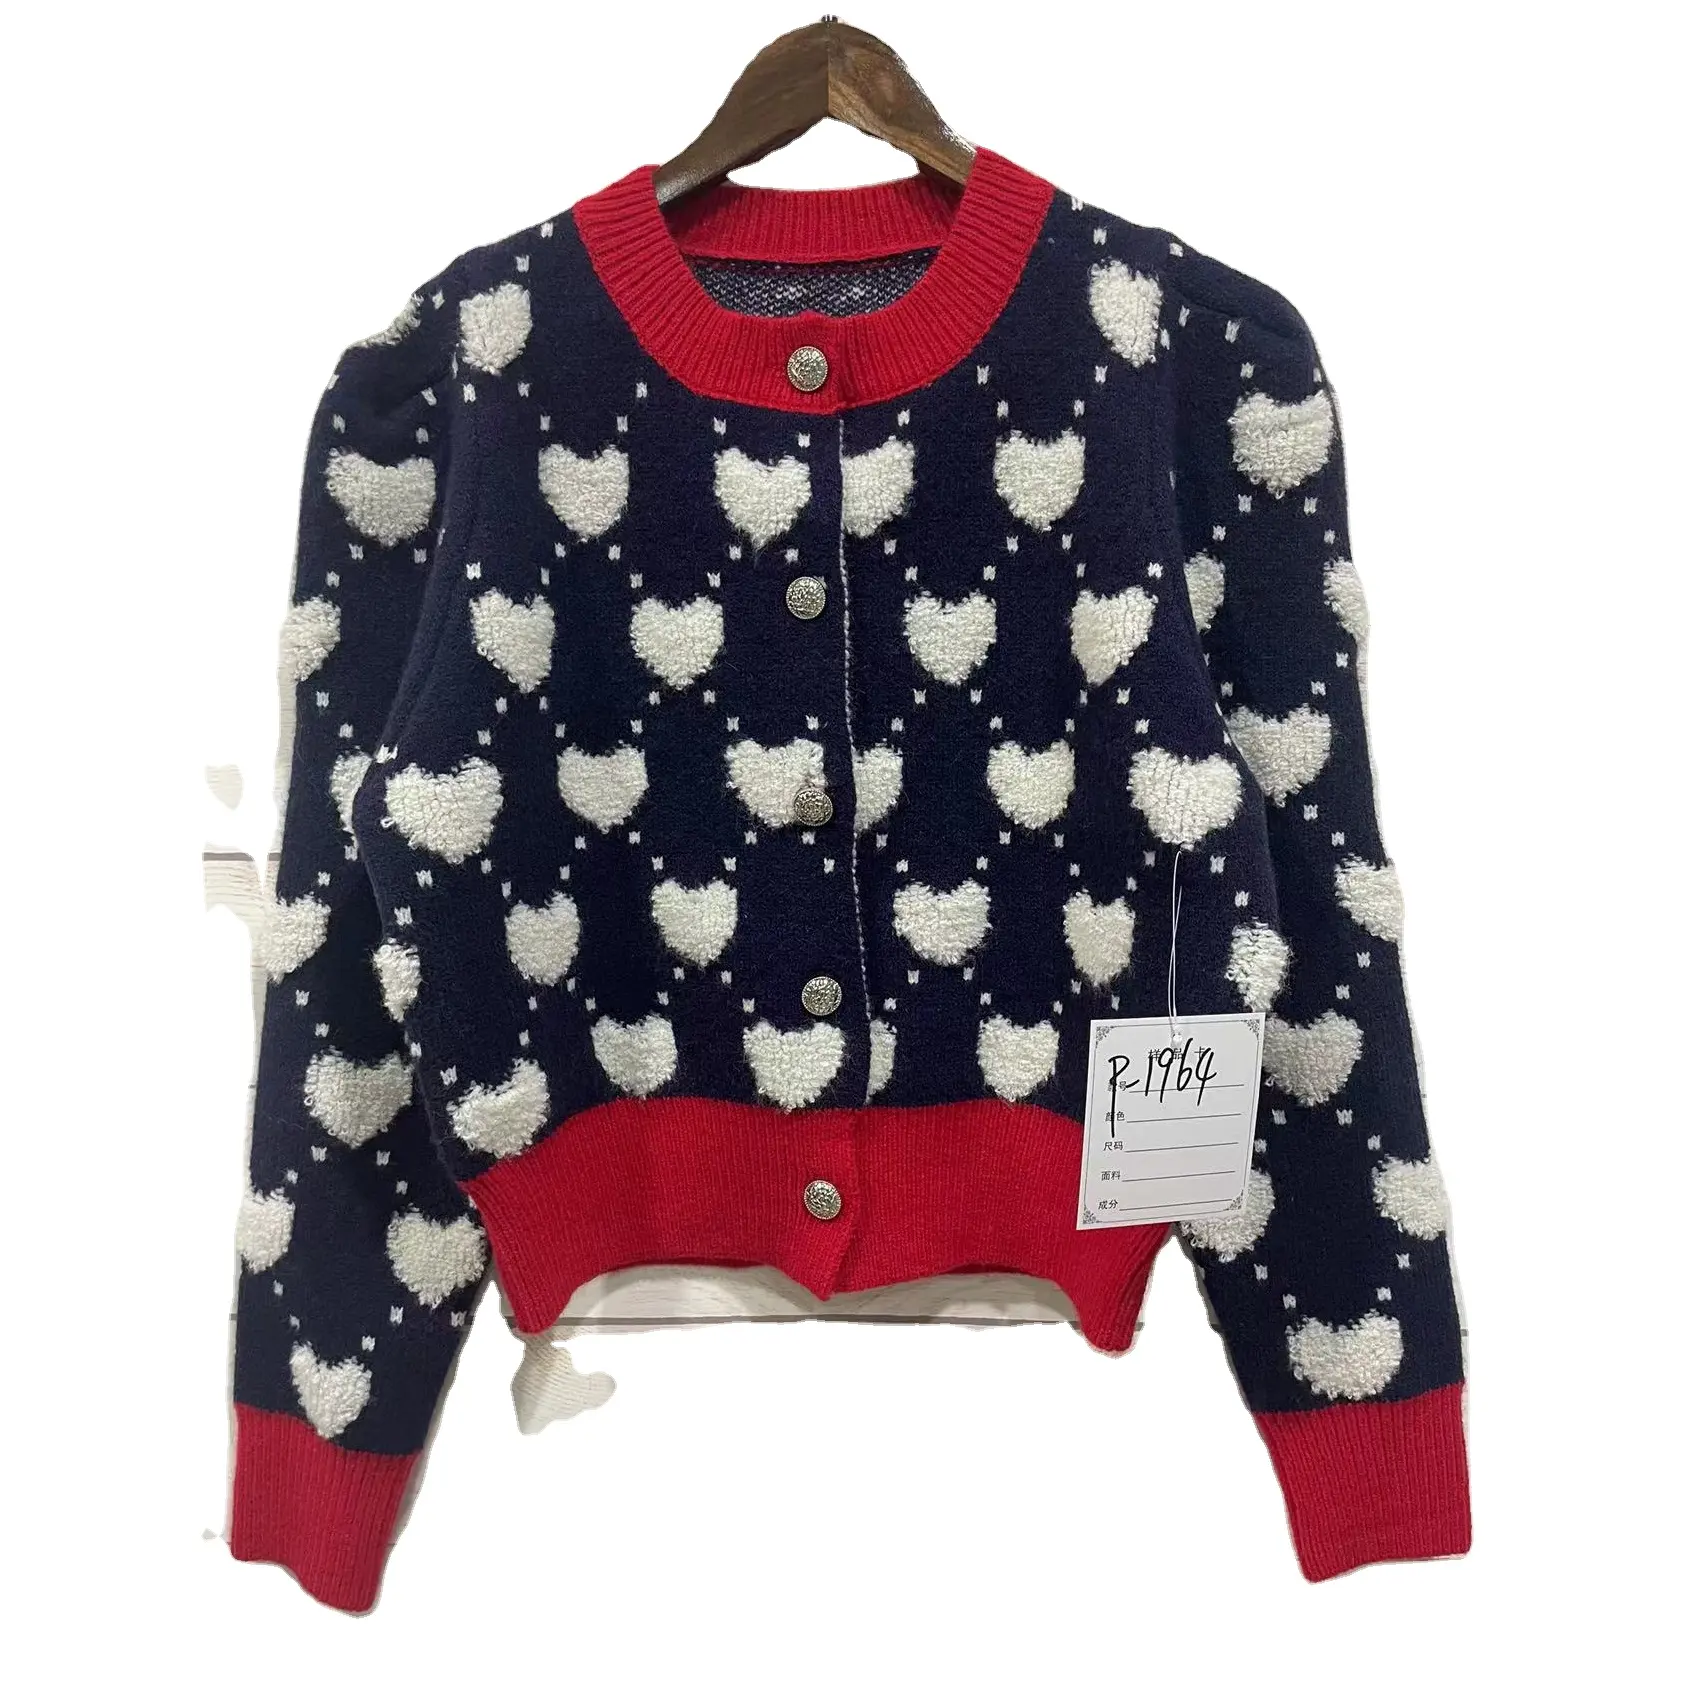 2022 New Women Chunky Knitted Heart Intarsia Cardigans In Navy Jacquard Sweater Coat Top Botton Front Top Jacket for Femme